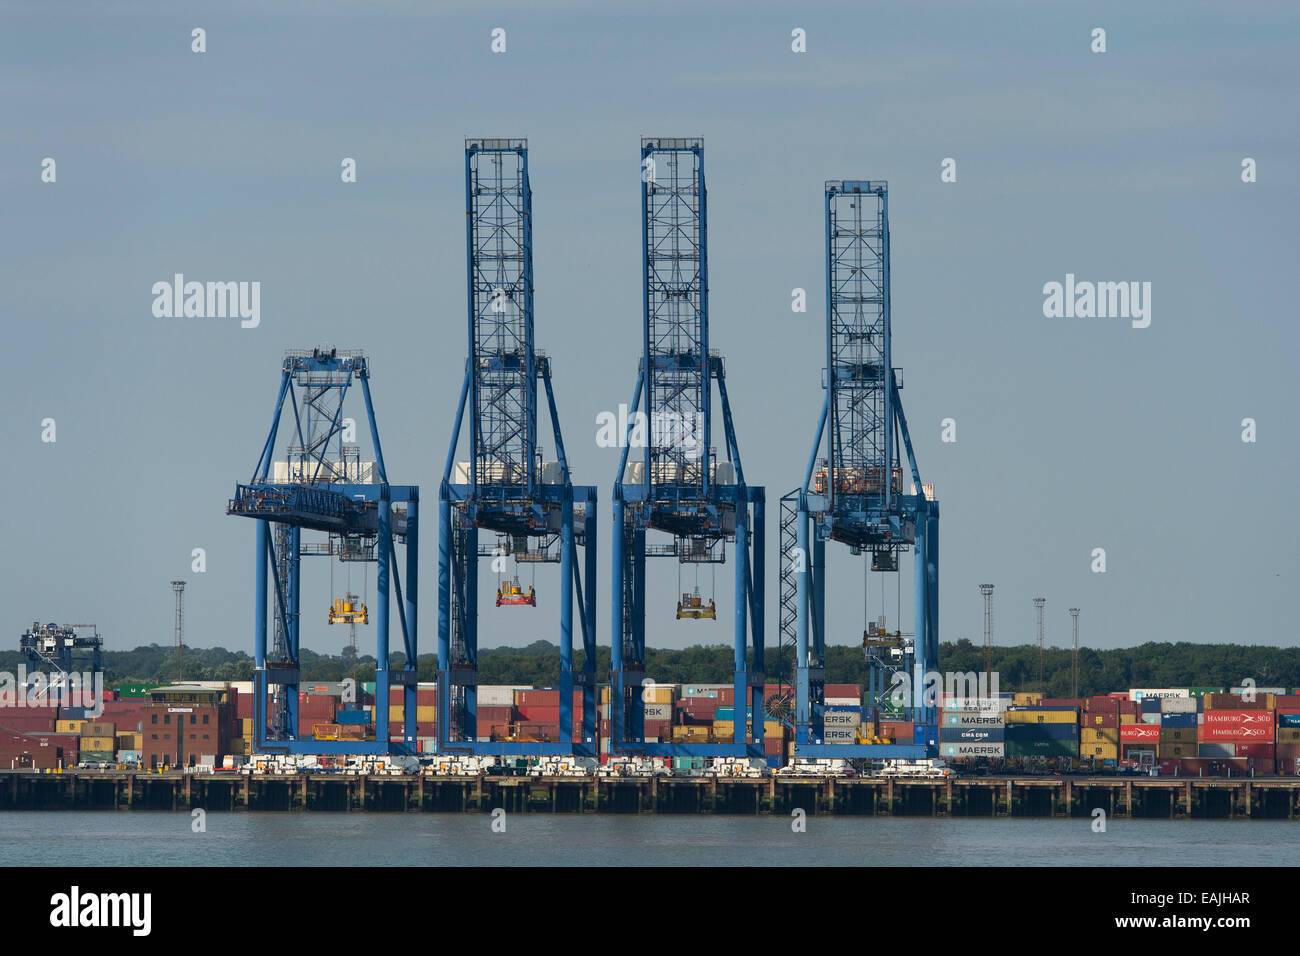 Shipping containers at the Port of Felixstowe in England, UK. Stock Photo